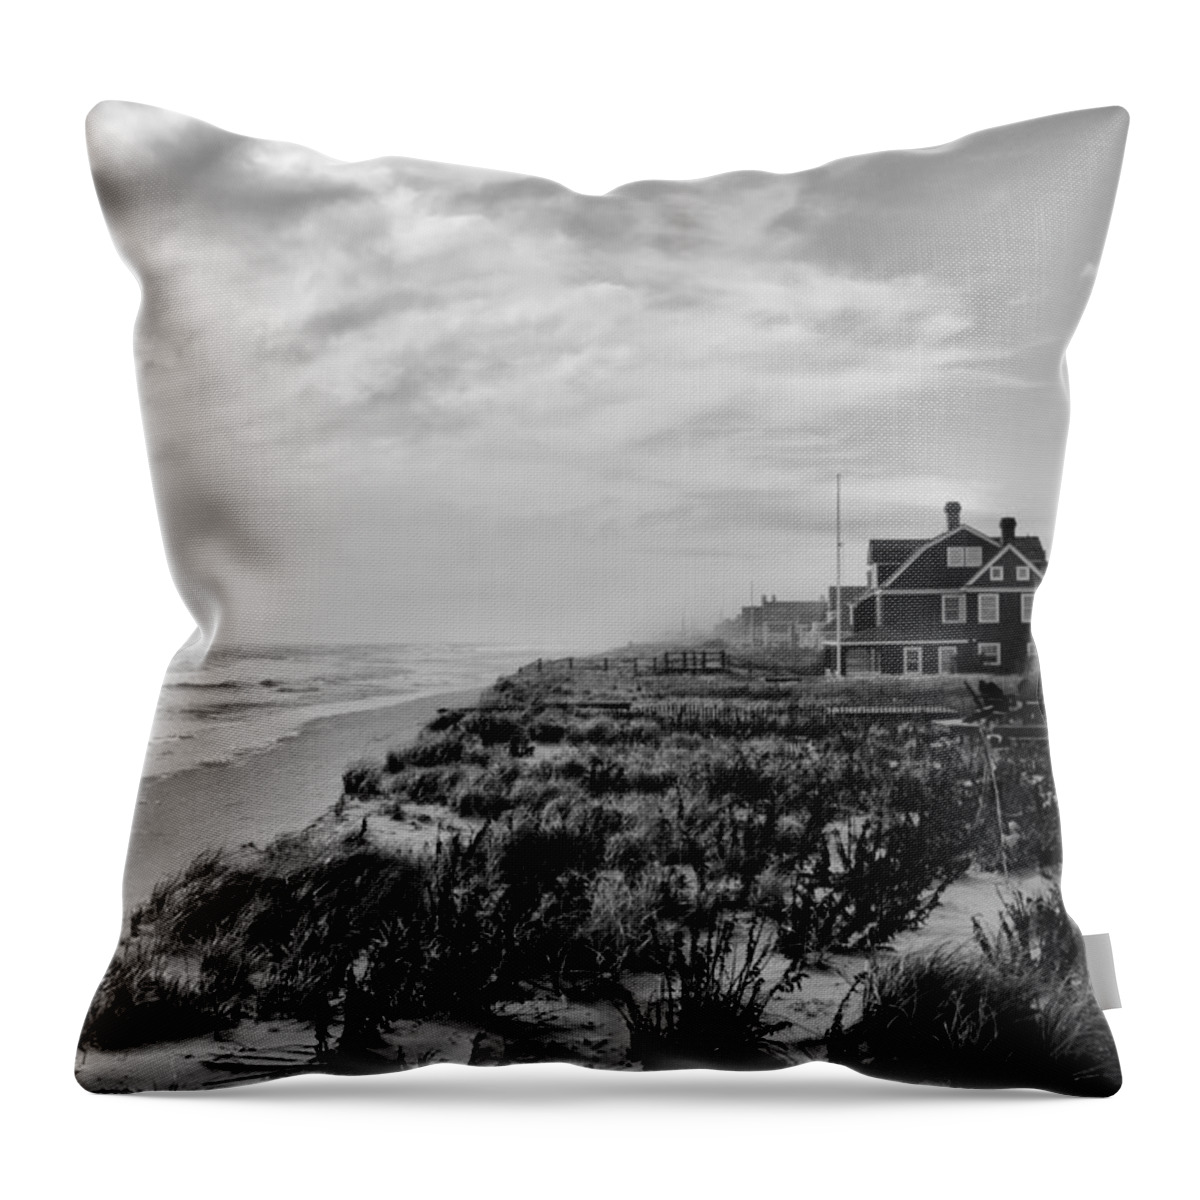 Jersey Shore Throw Pillow featuring the photograph Mantoloking Beach - Jersey Shore by Angie Tirado